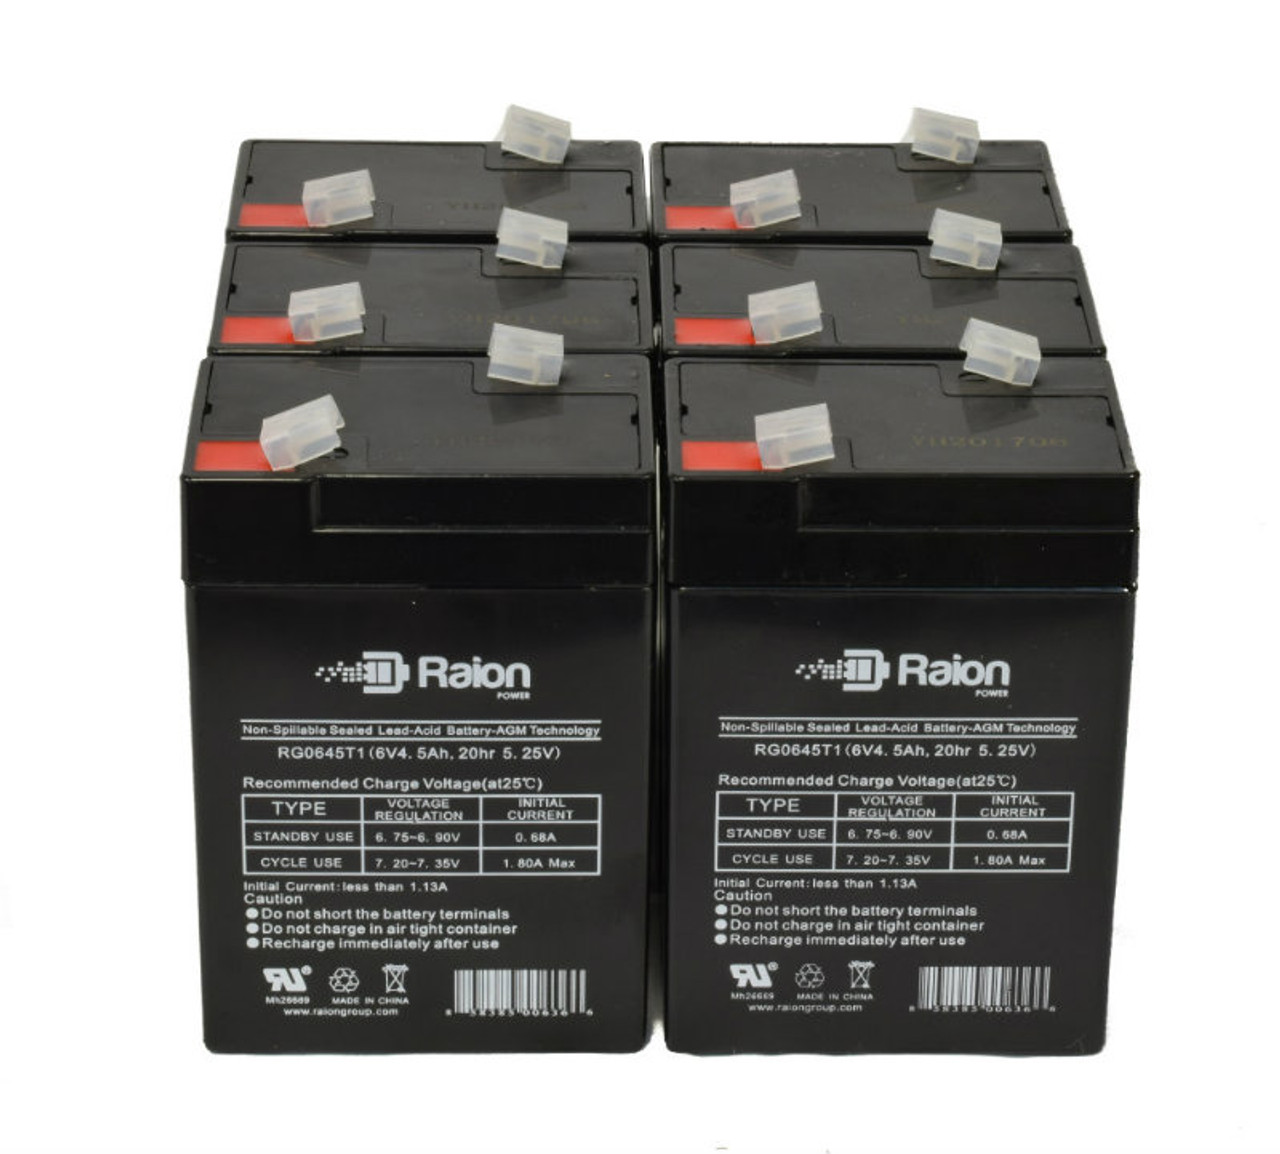 Raion Power 6V 4.5Ah Replacement Emergency Light Battery for Trio Lighting TL930007 - 6 Pack